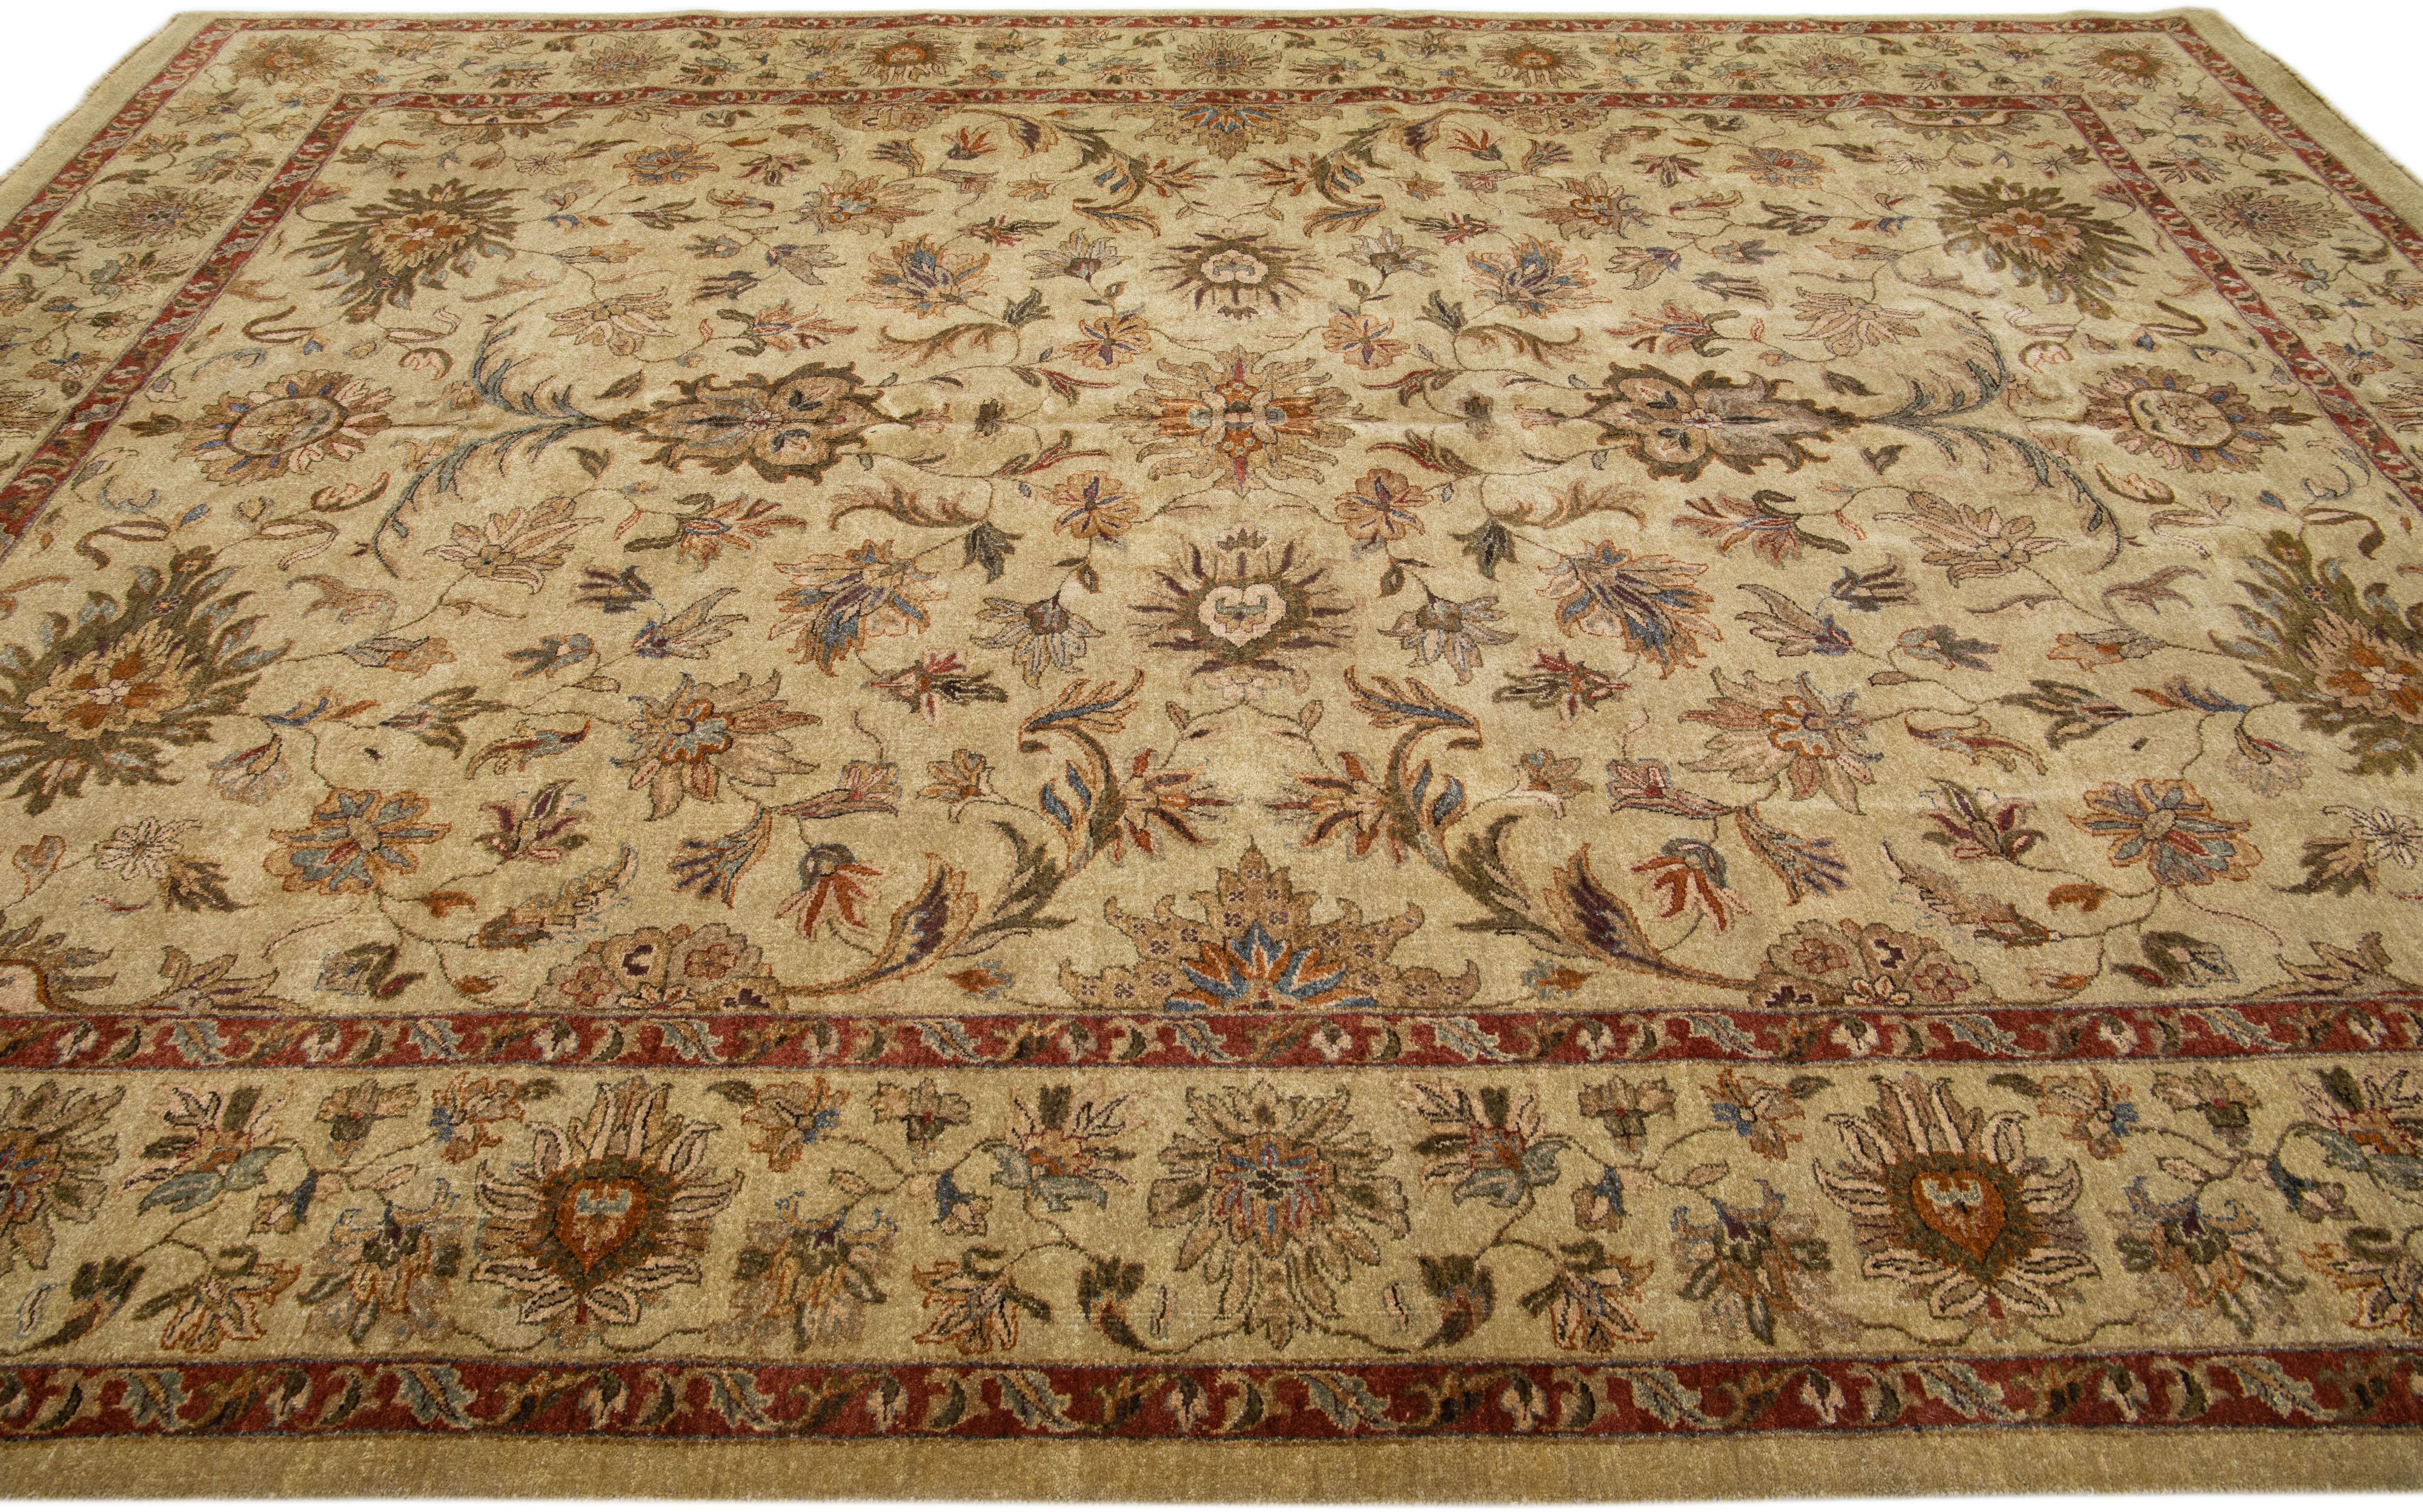 Contemporary Indian Handmade Floral Wool Rug In Tan Color In New Condition For Sale In Norwalk, CT